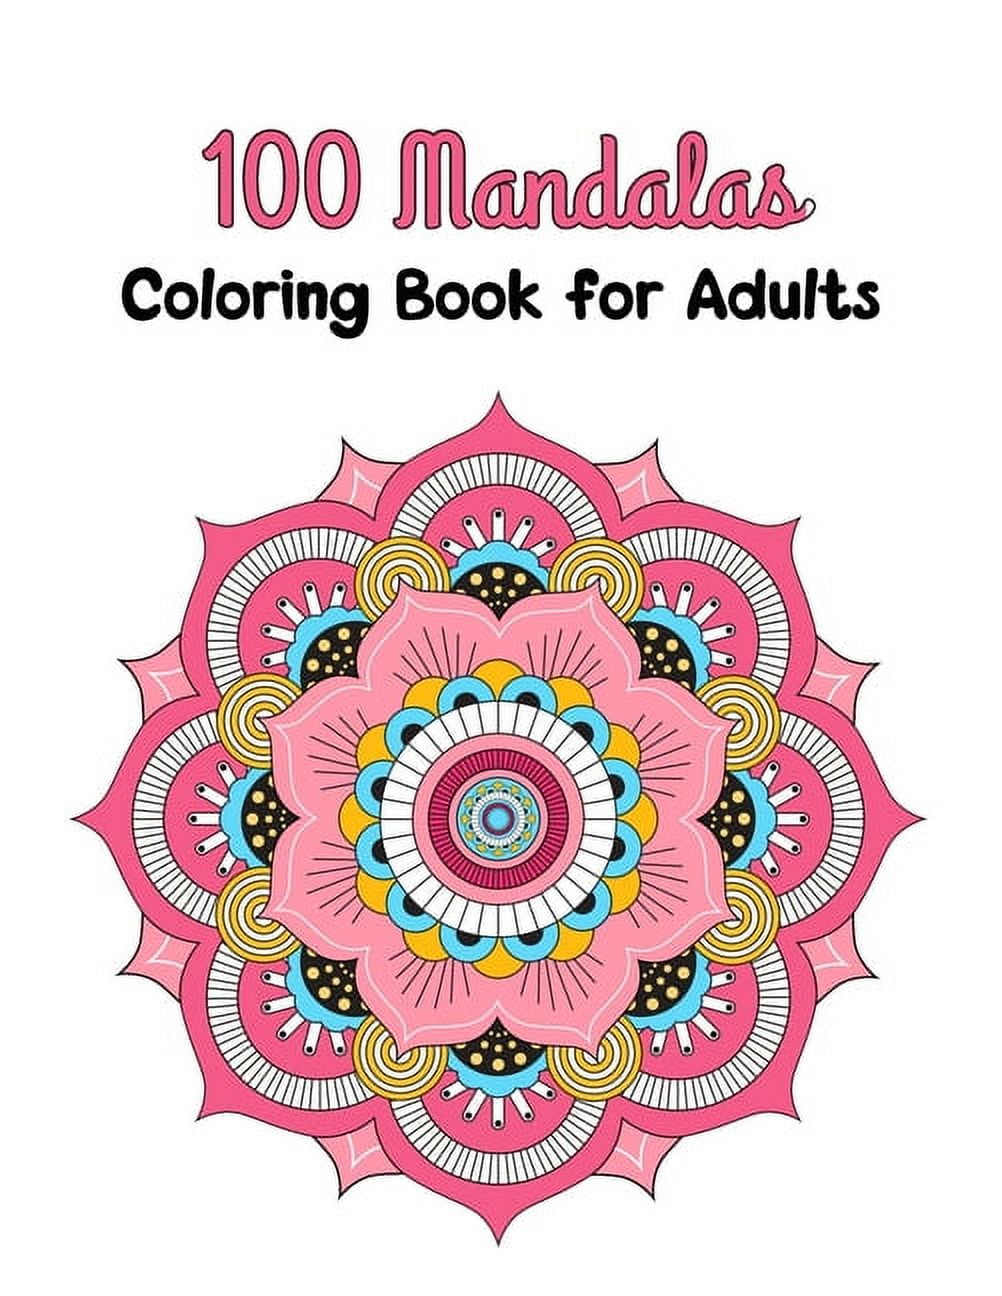 Spiral Mandalas Coloring Book for Adults: 35 One Line Spiral Mandalas for  Adults Relaxation and Stress Relief Vol.2 (One Line Spiral Mandalas  Coloring